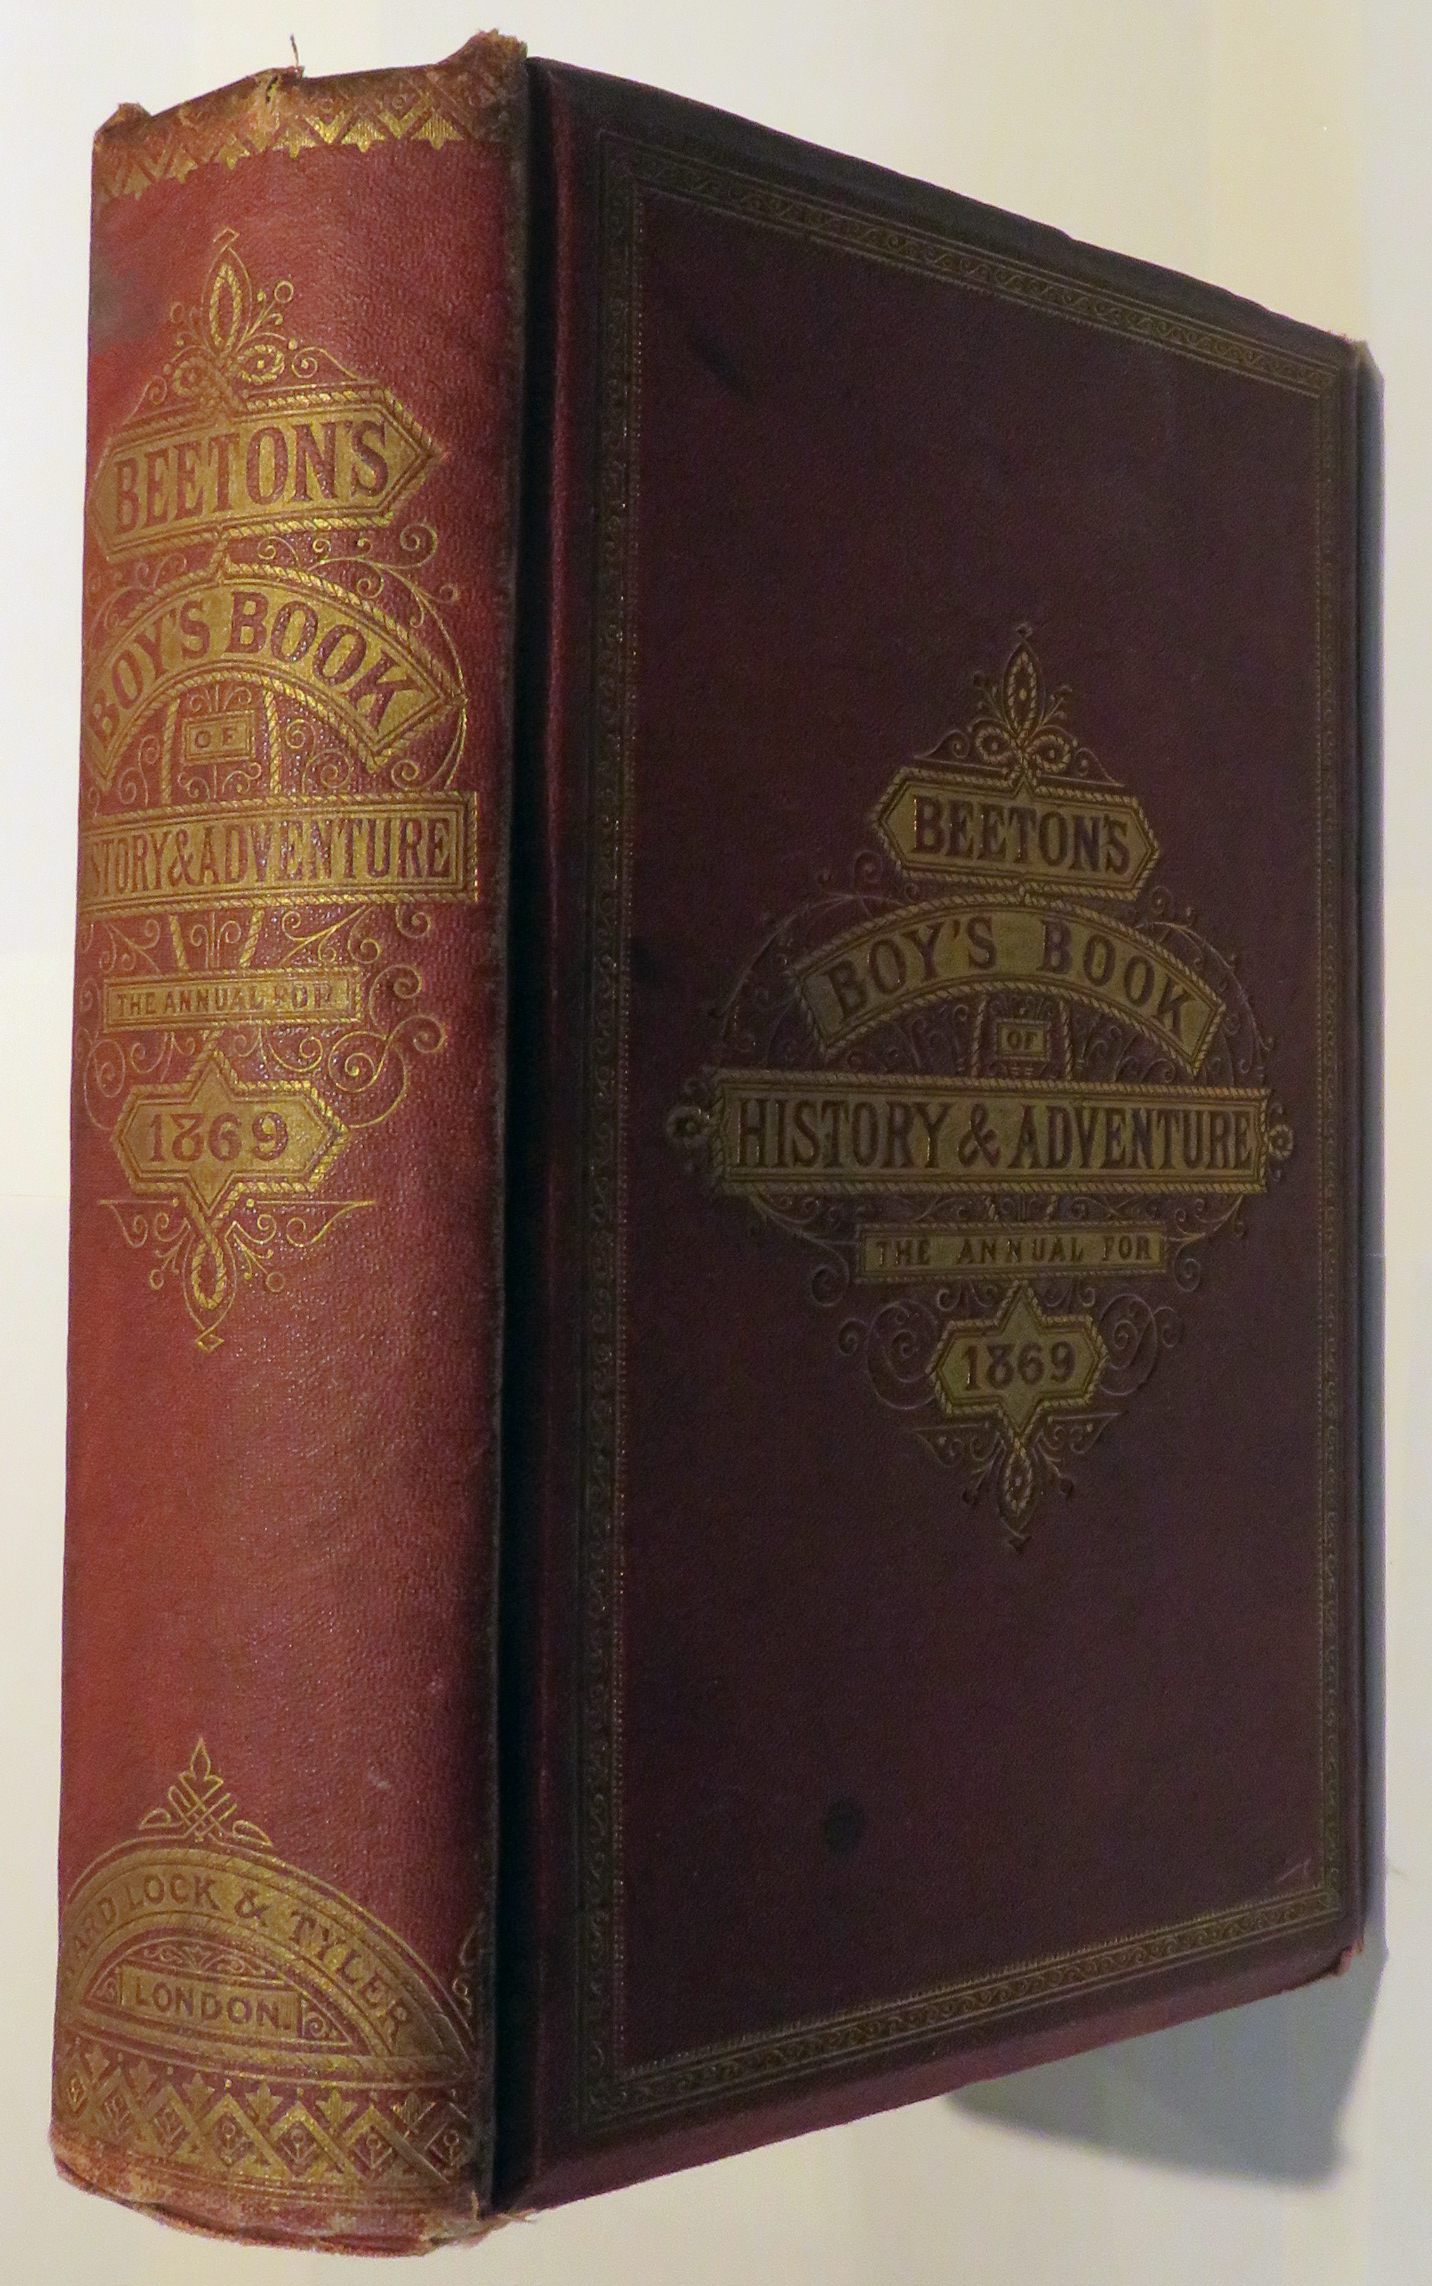 Beeton's Boy's Annual. A Volume Of Fact, Fiction, History, and Adventure 